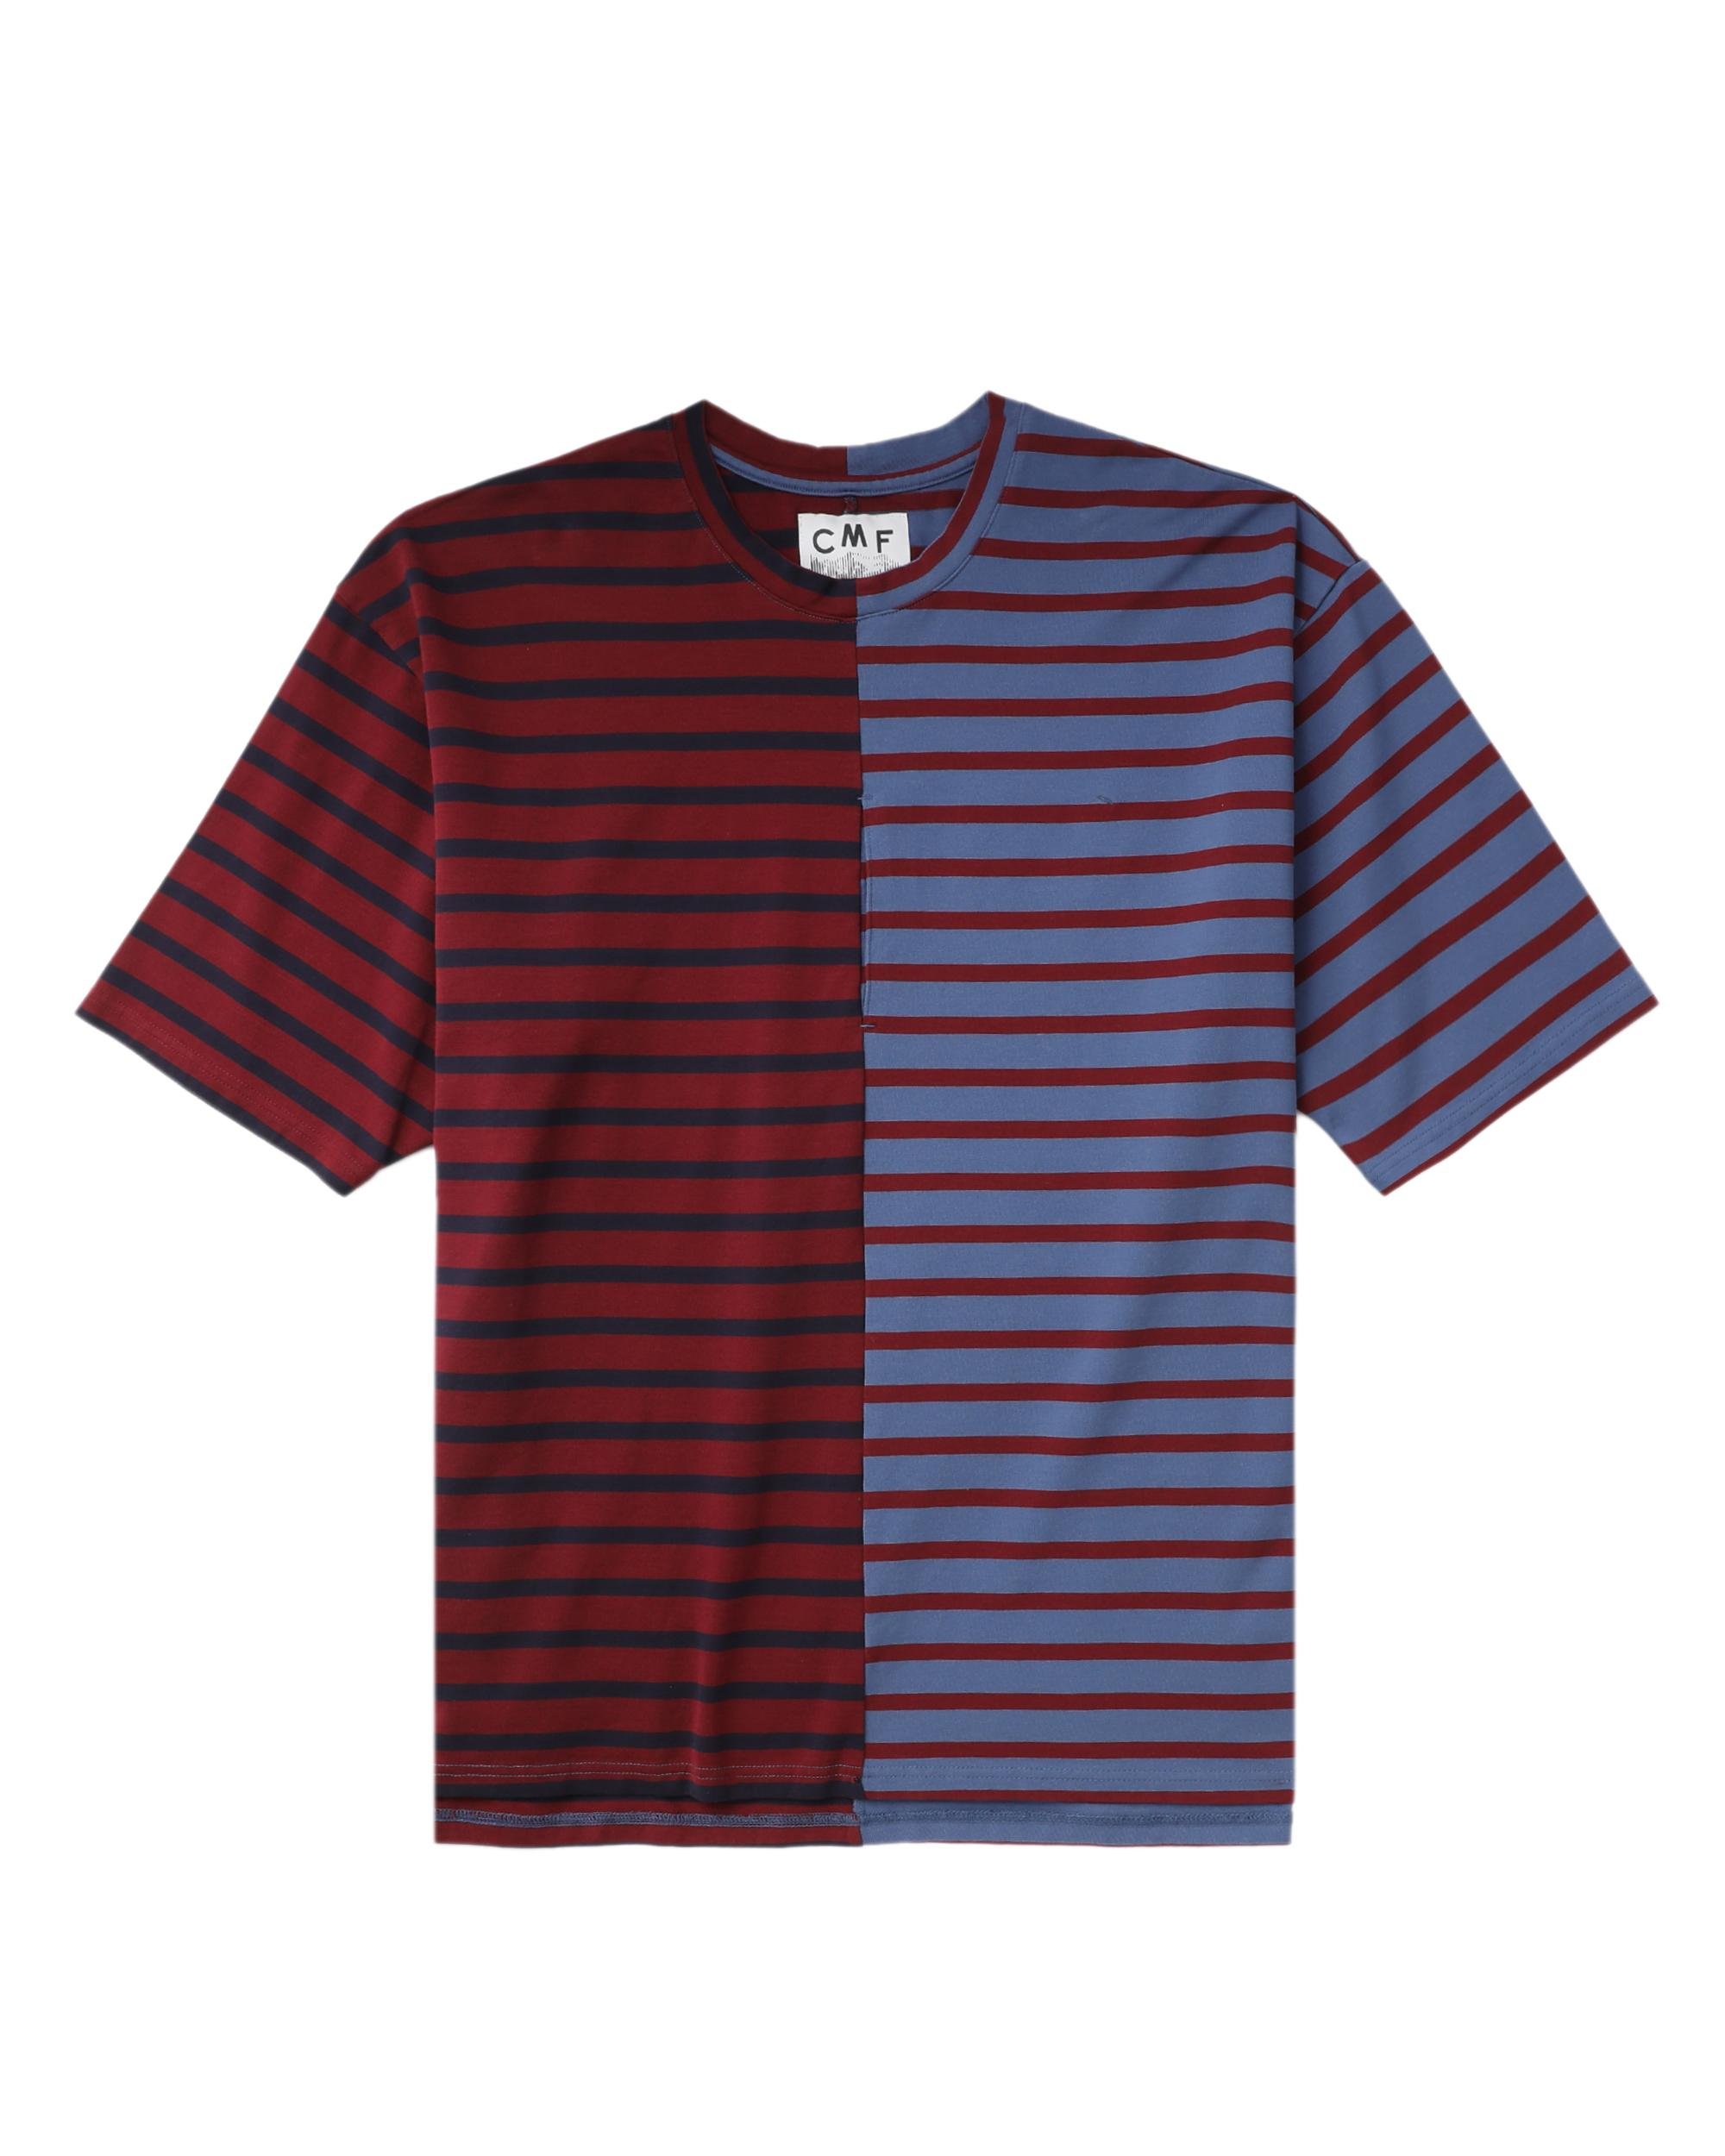 Colour block striped tee by COMFY OUTDOOR GARMENT